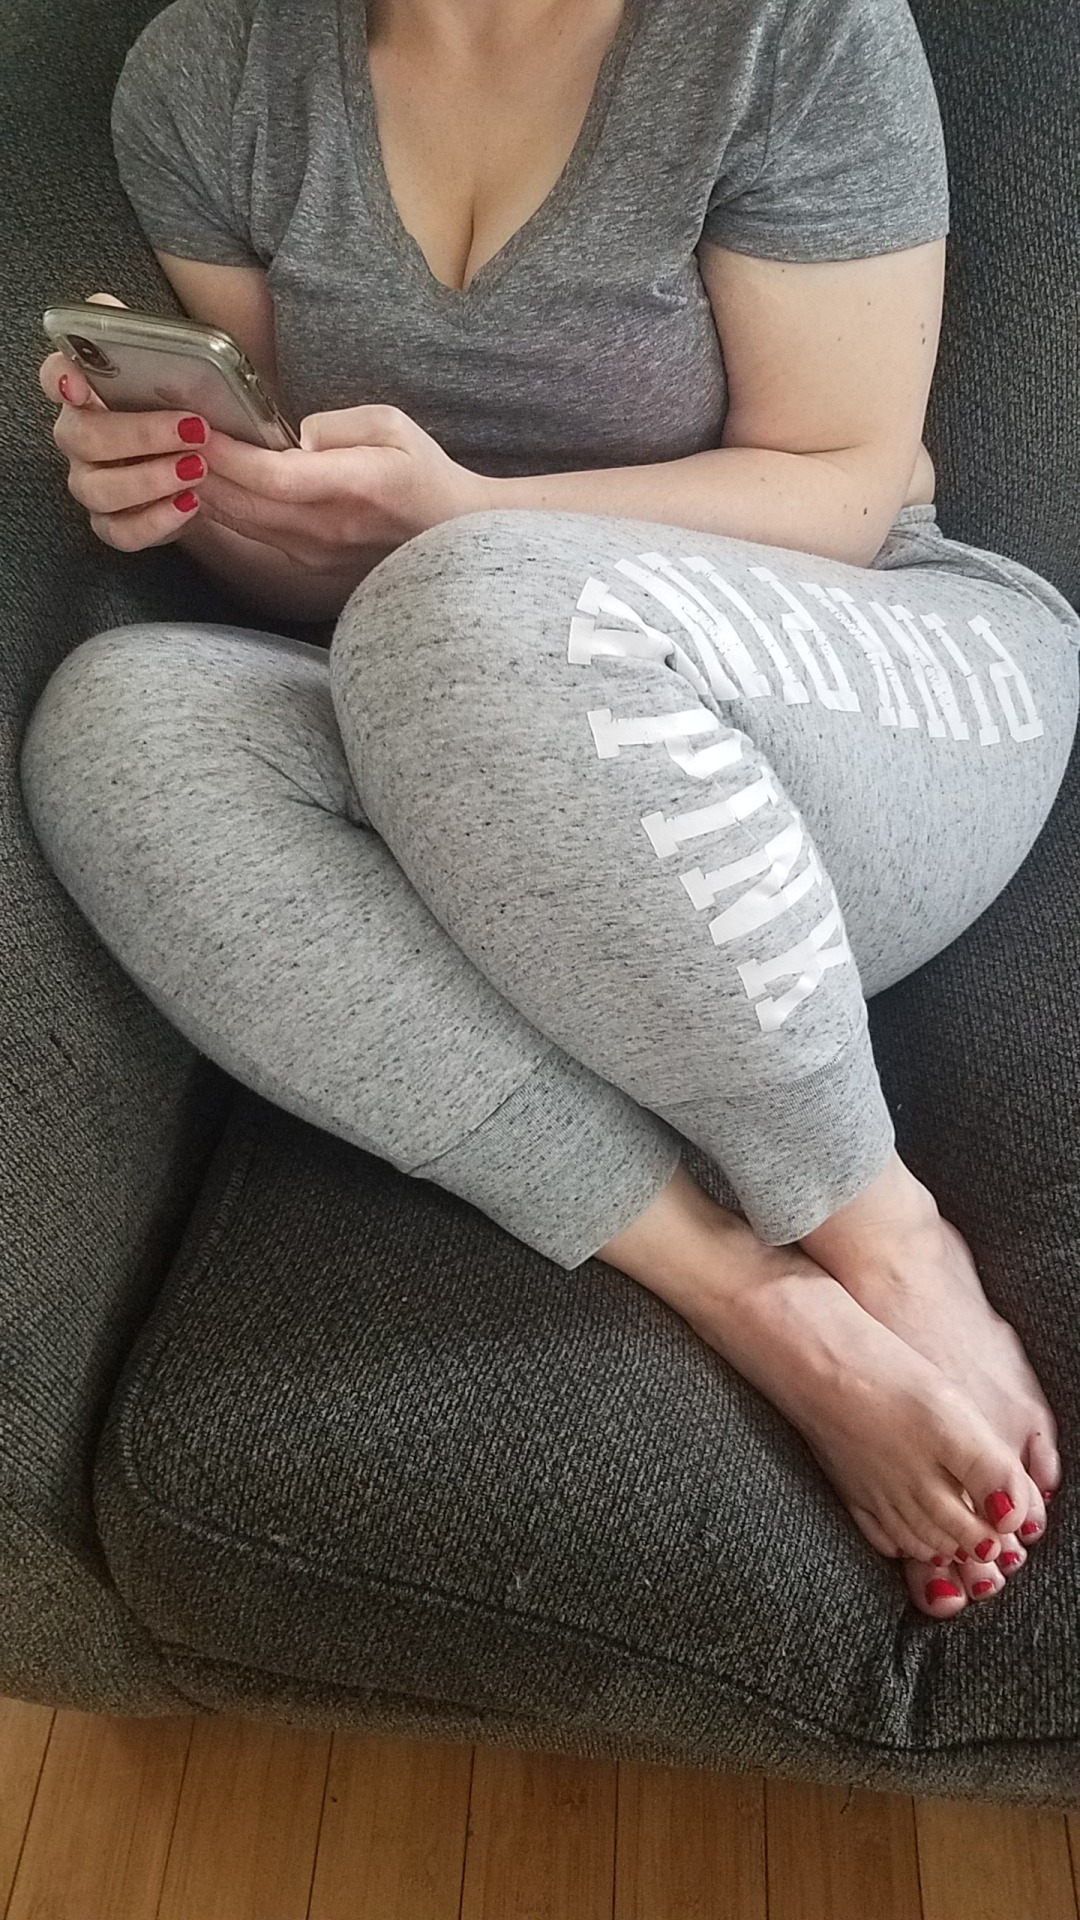 Candid Homemade And All Original Pics — My Pretty Wife In Her Beautiful